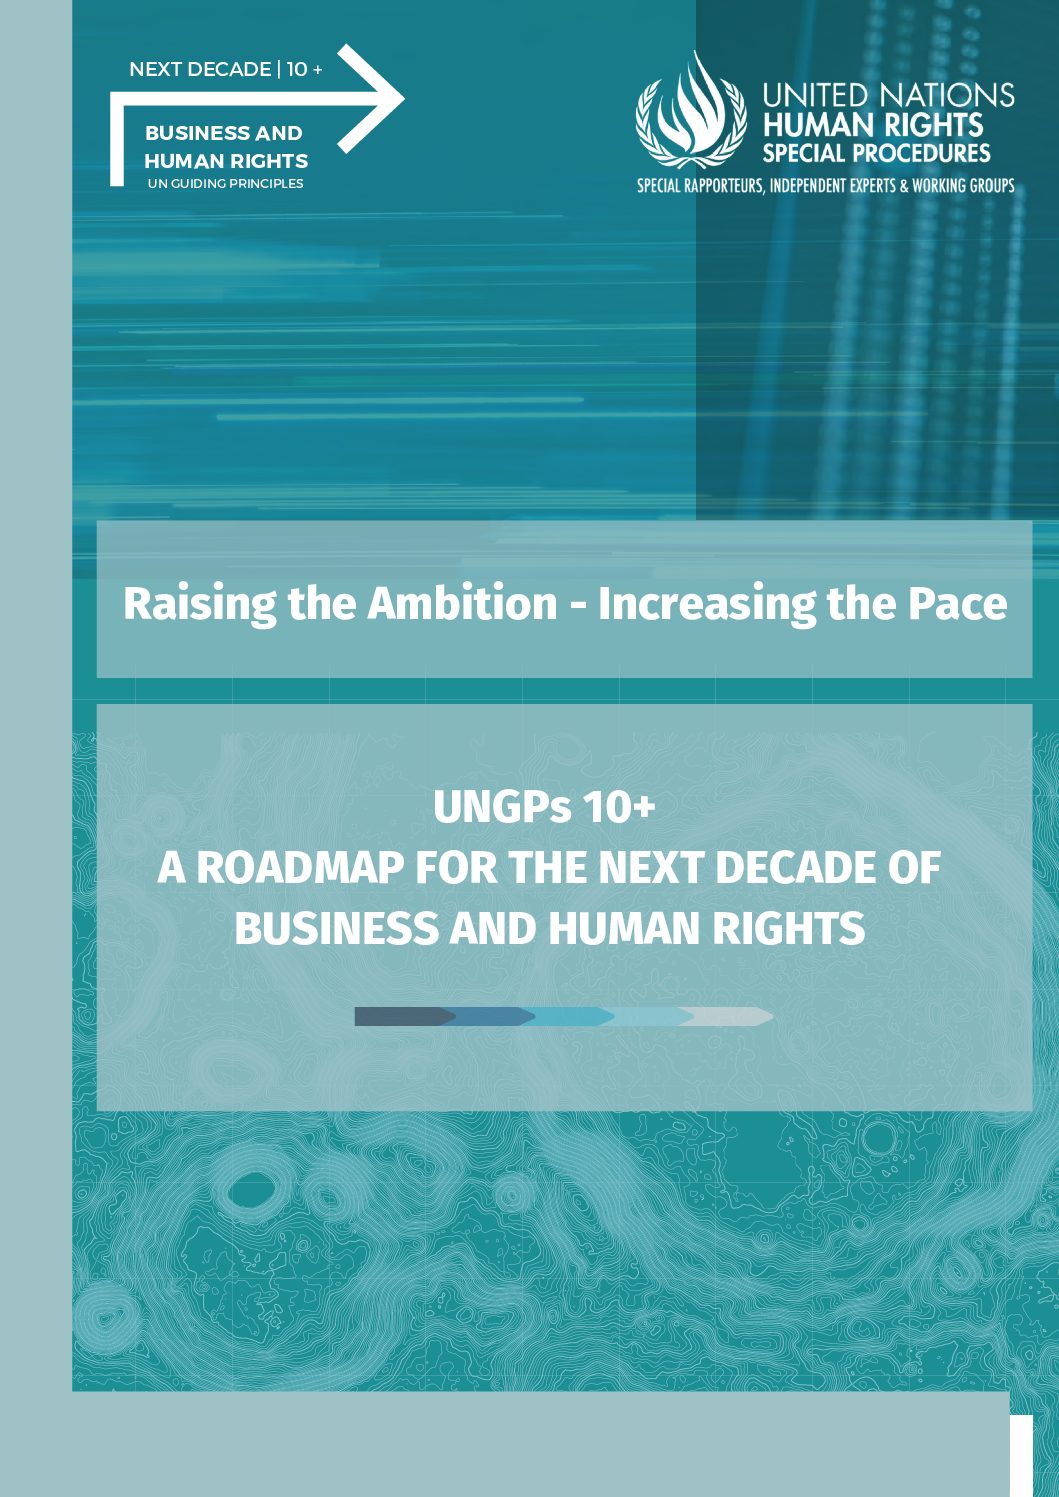 UNGPs 10+: A Roadmap for the Next Decade of Business and Human Rights